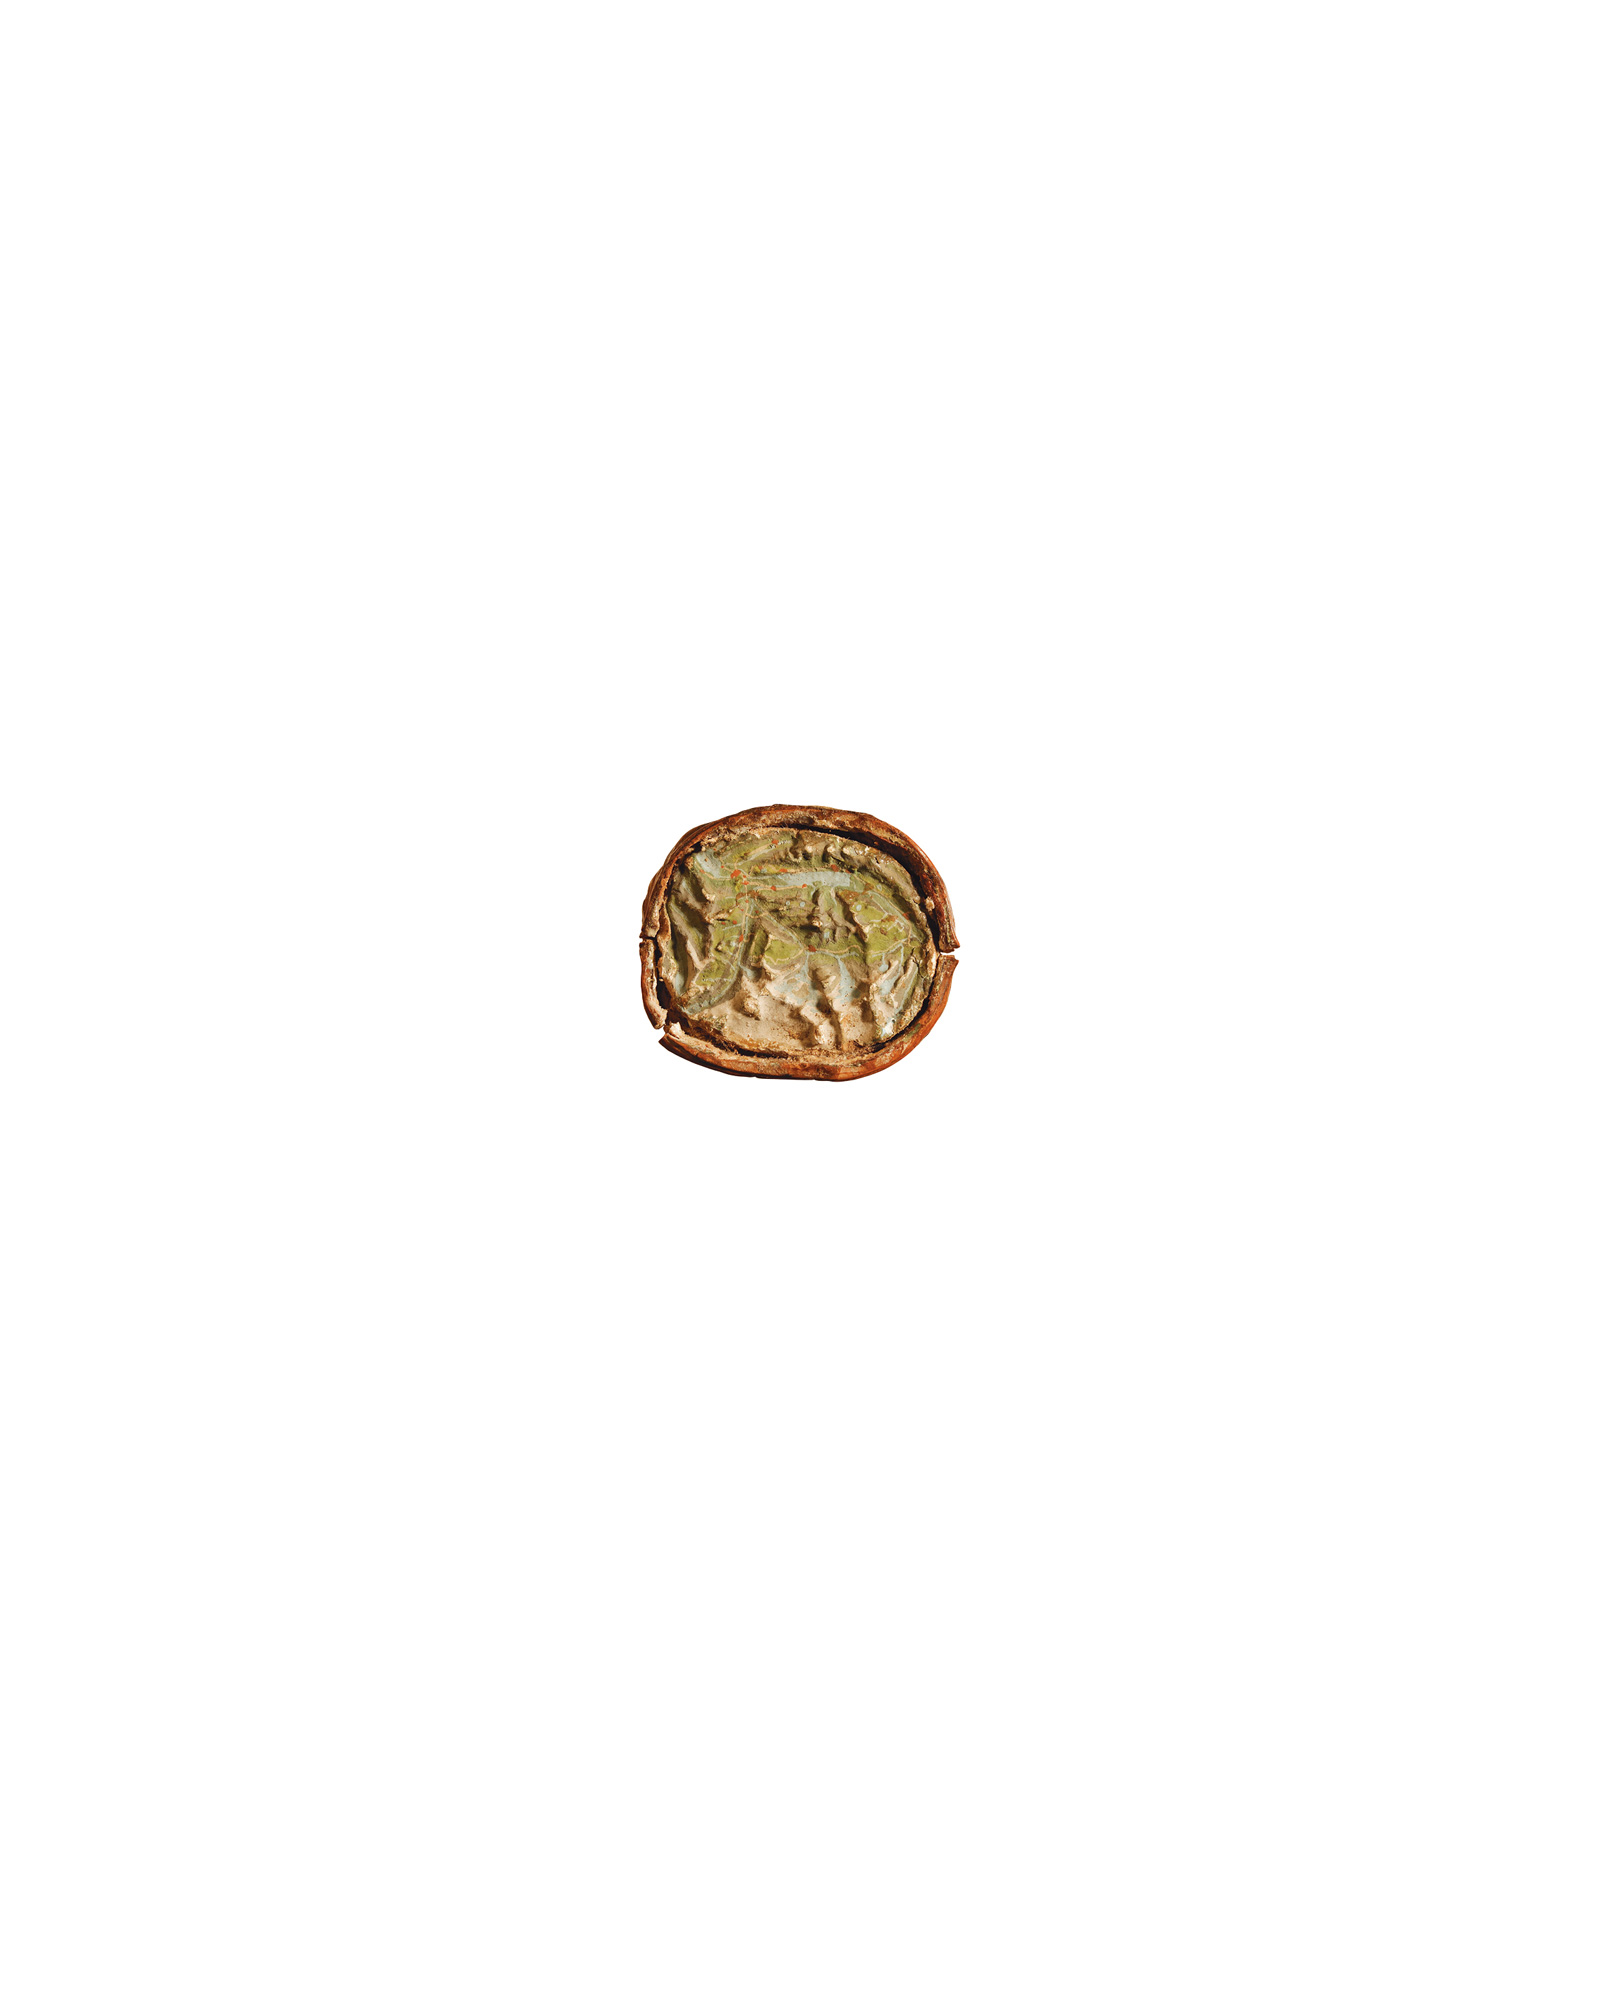 A photograph of a relief map of a portion of the Alps modeled inside a walnut shell.